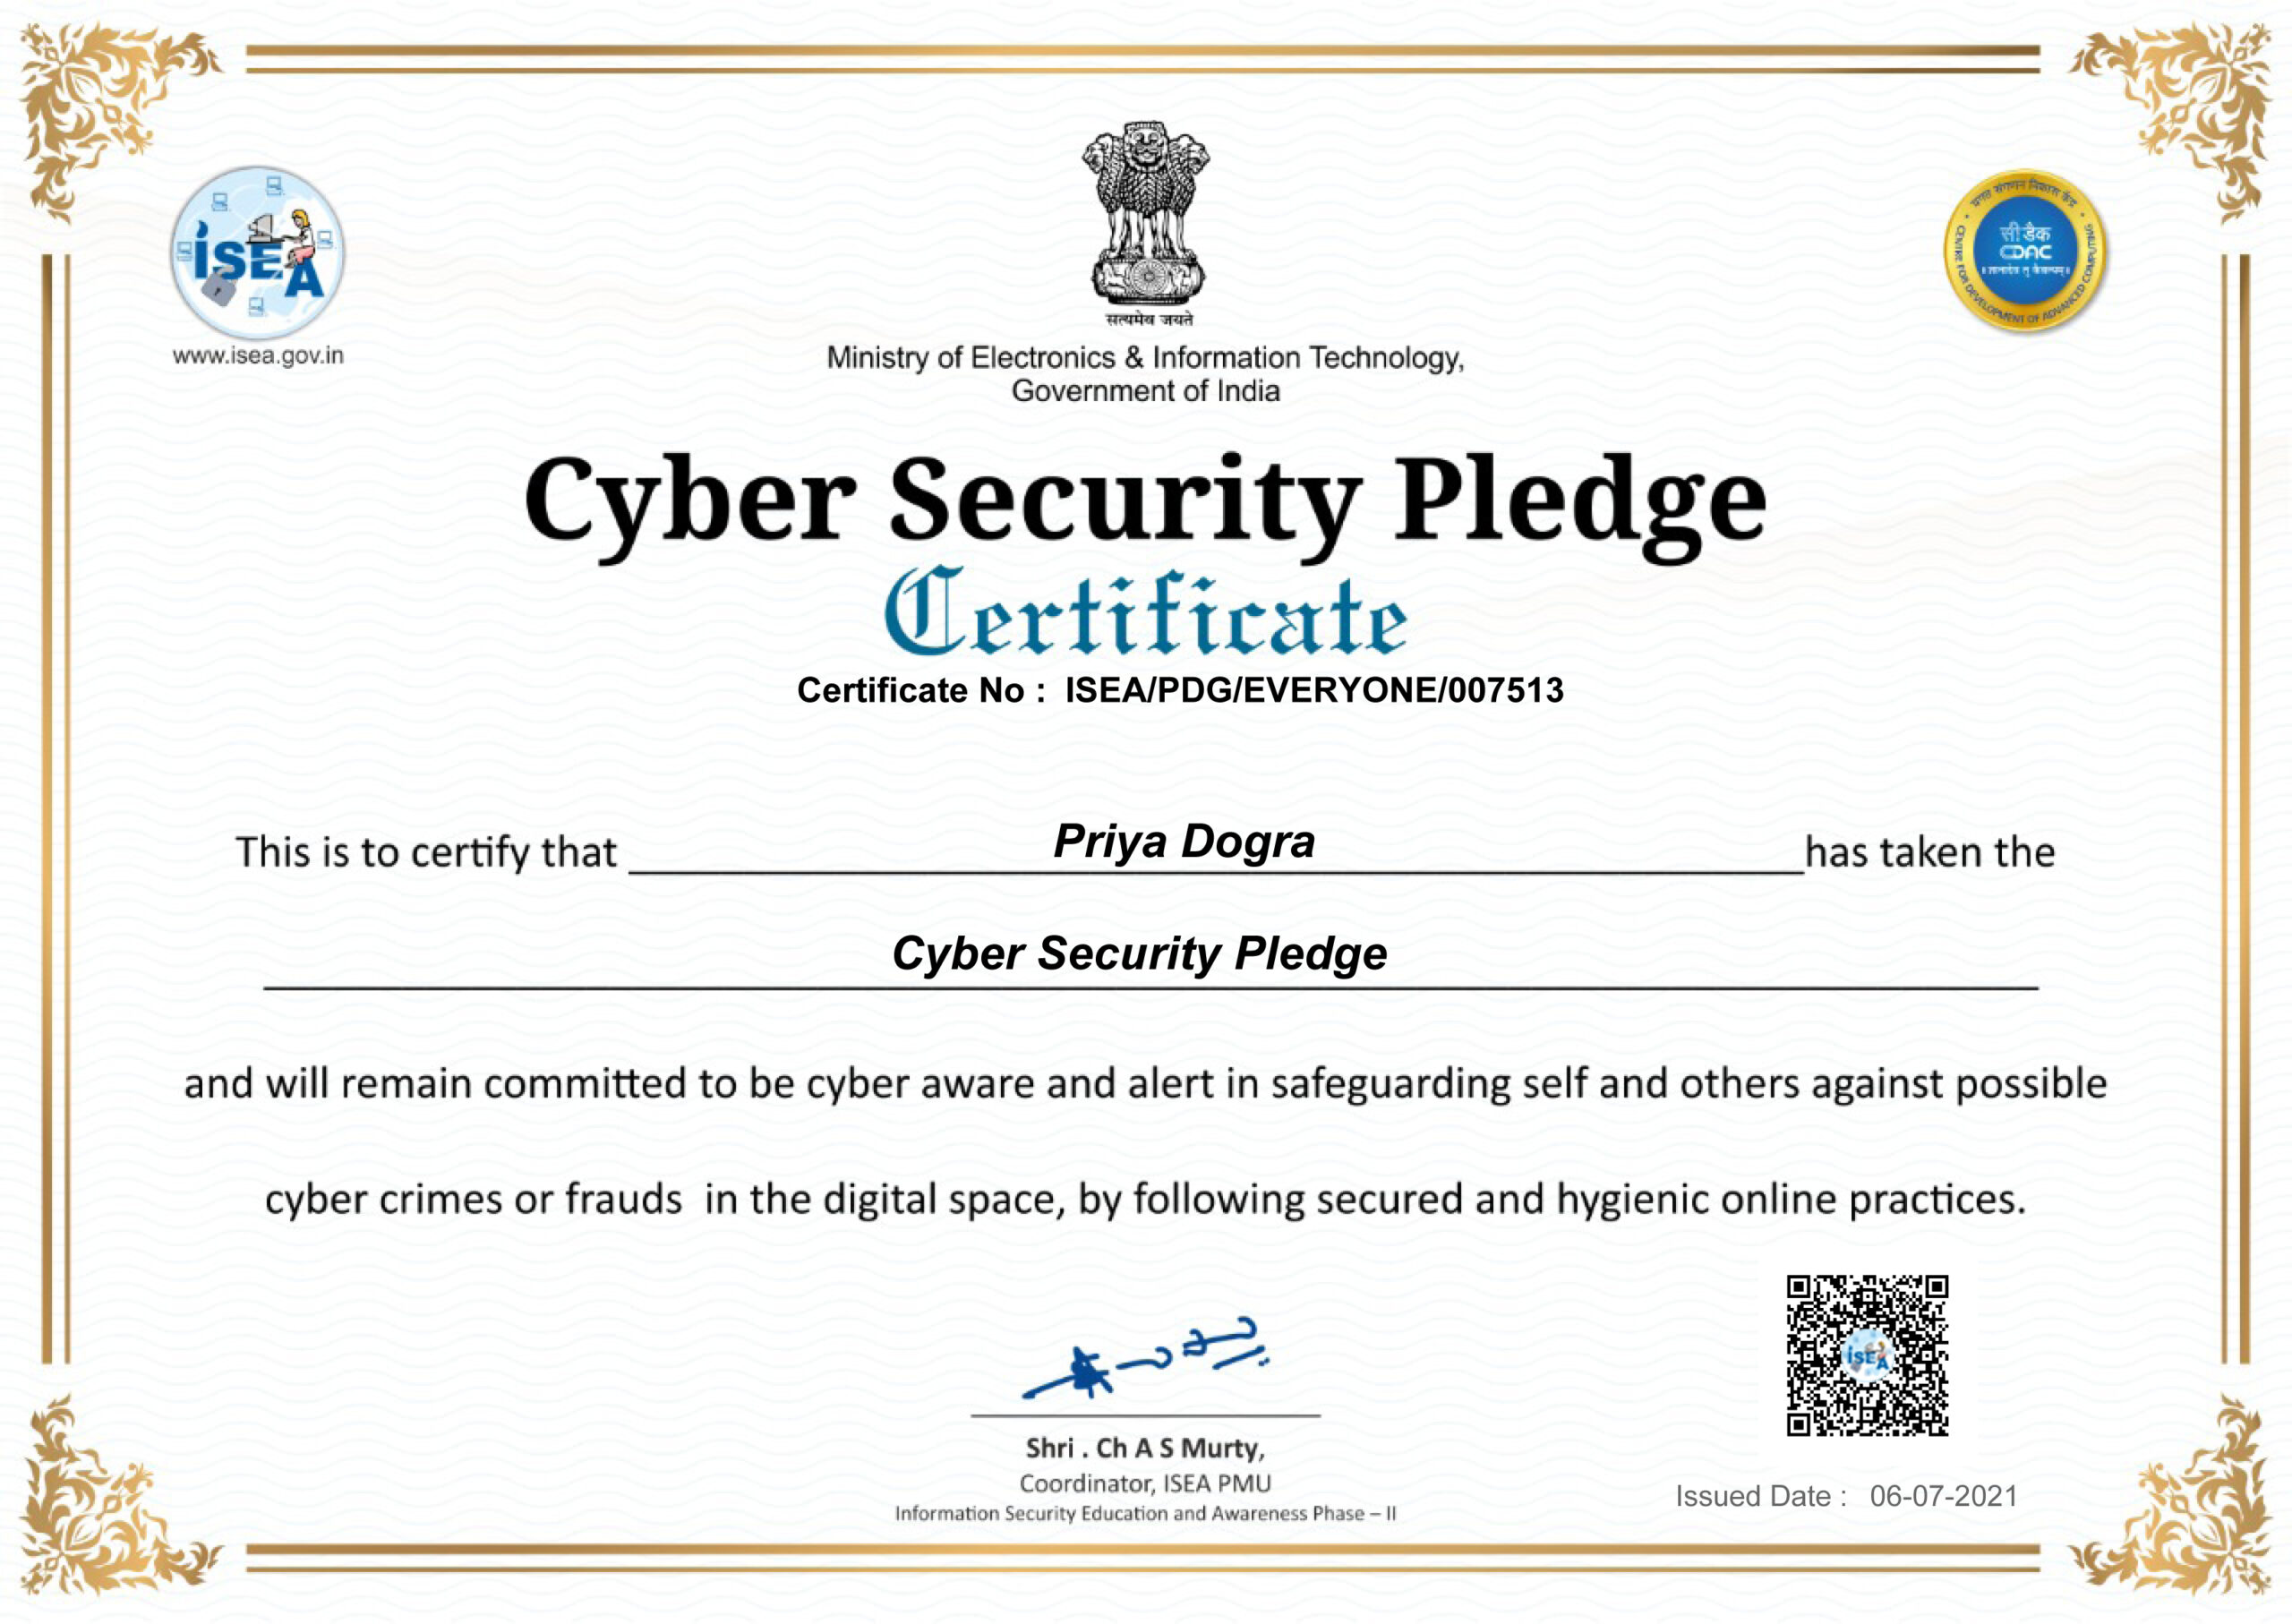 CDAC Free Cyber Security Certificate Scaled 